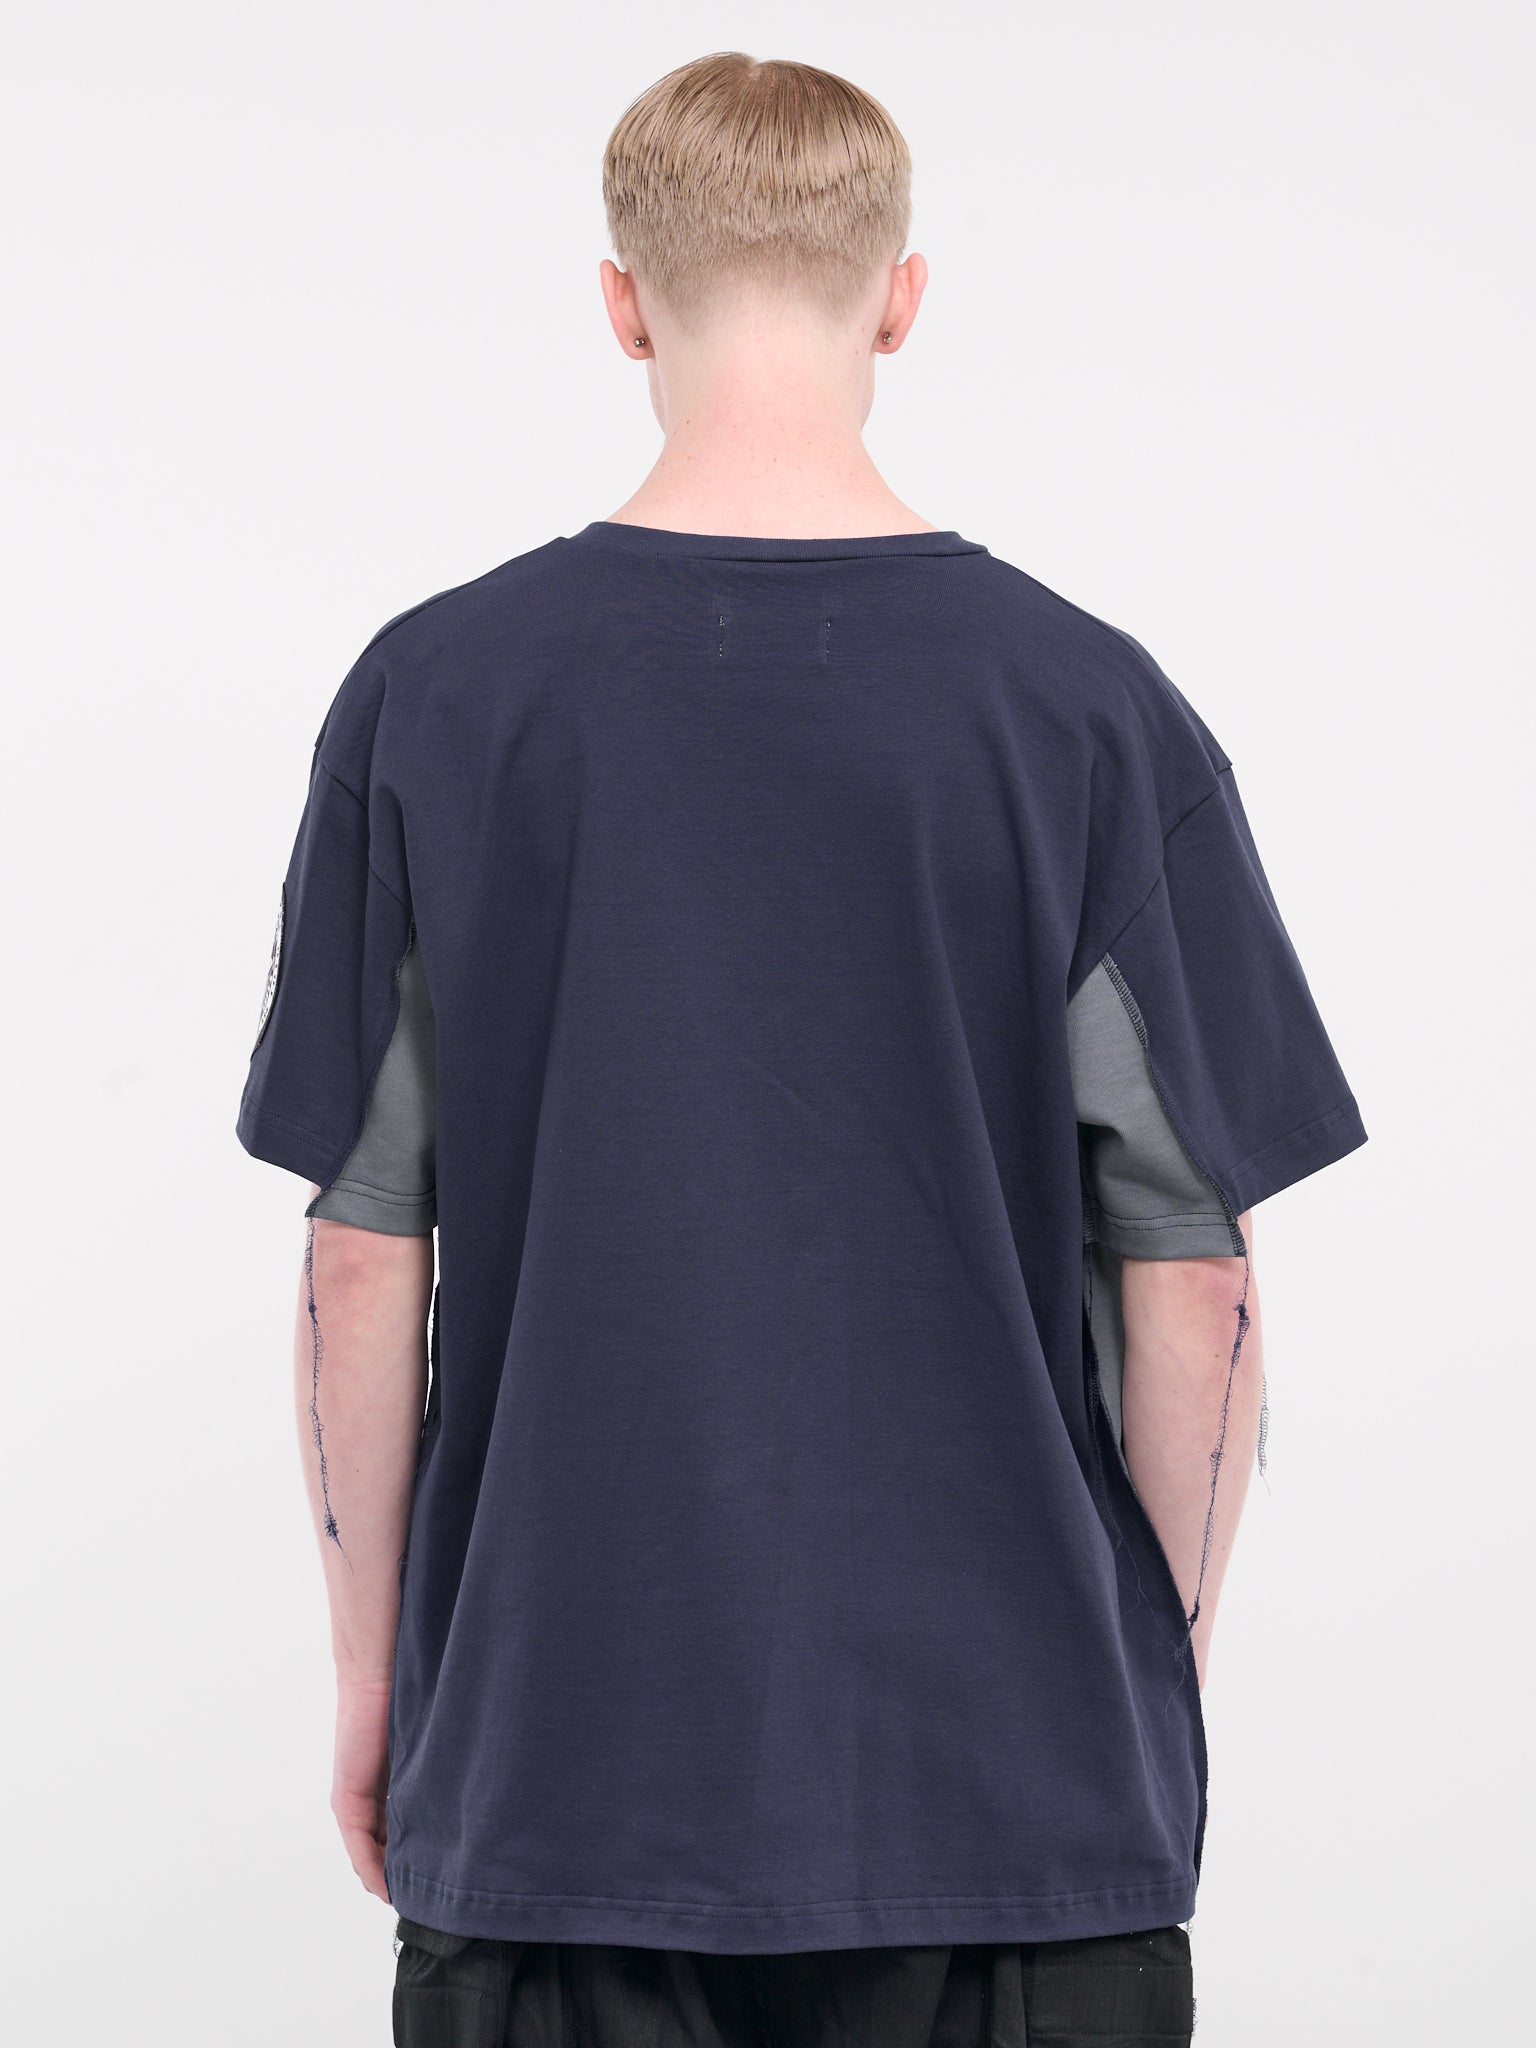 Distressed Graphic Patch Tee (KL820-NAVY-GREY)